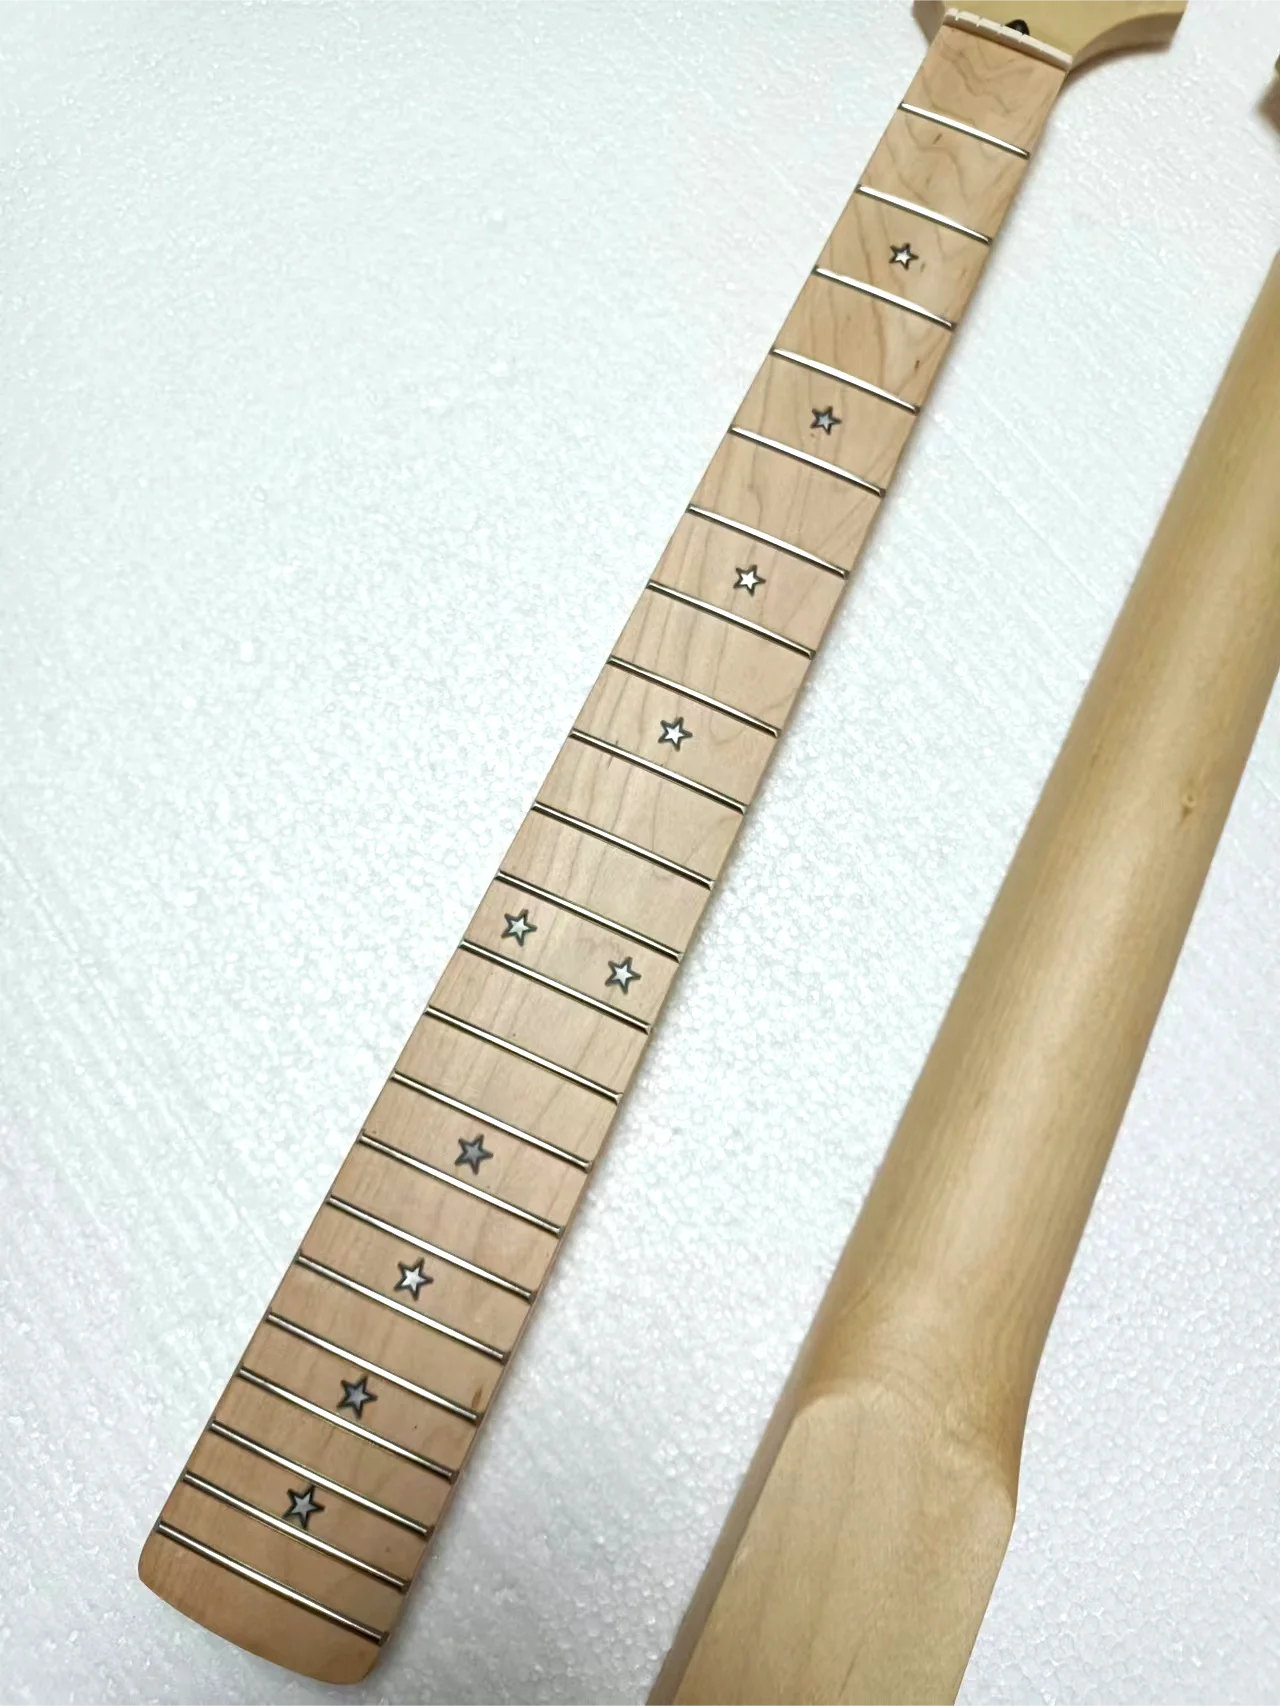 22-Fret ST Style Electric Guitar Neck Little Star Inlay Canadian Maple Wood Color(1pc,Free Logo Service) enlarge